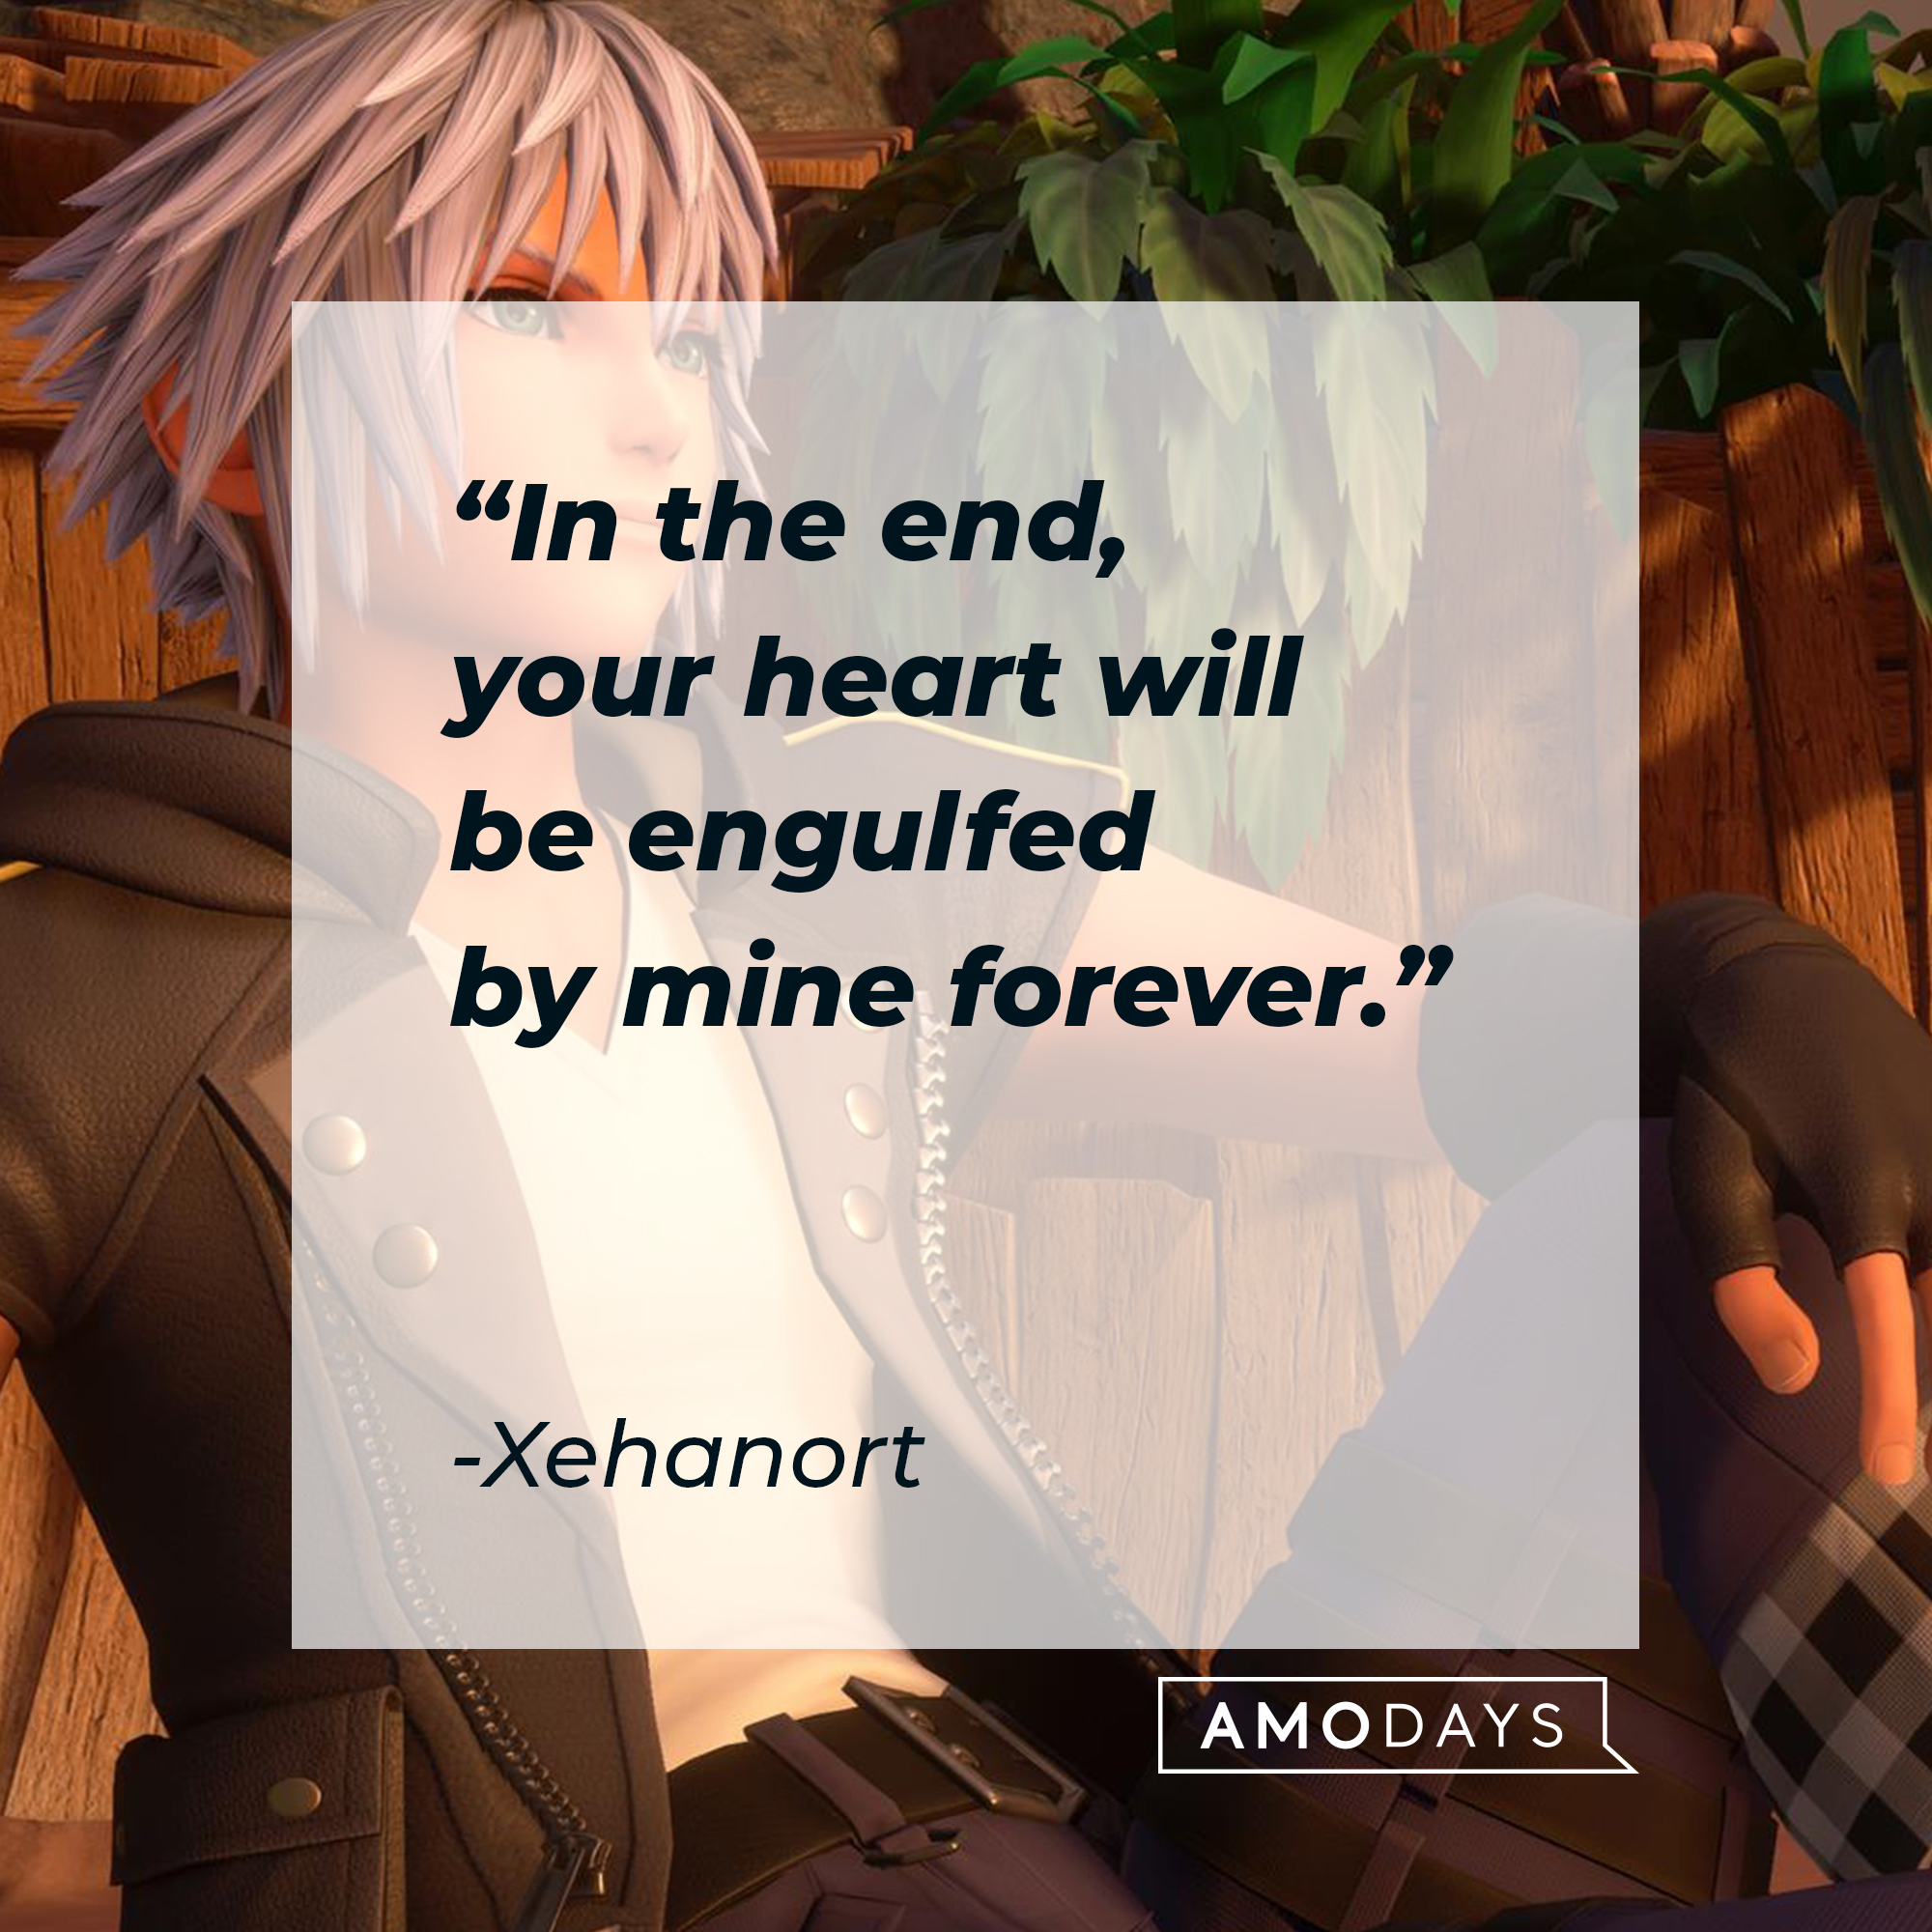 An image of Riku with Xehanort’s quote: “In the end, your heart will be engulfed by mine forever.” | Source: facebook.com/KingdomHearts